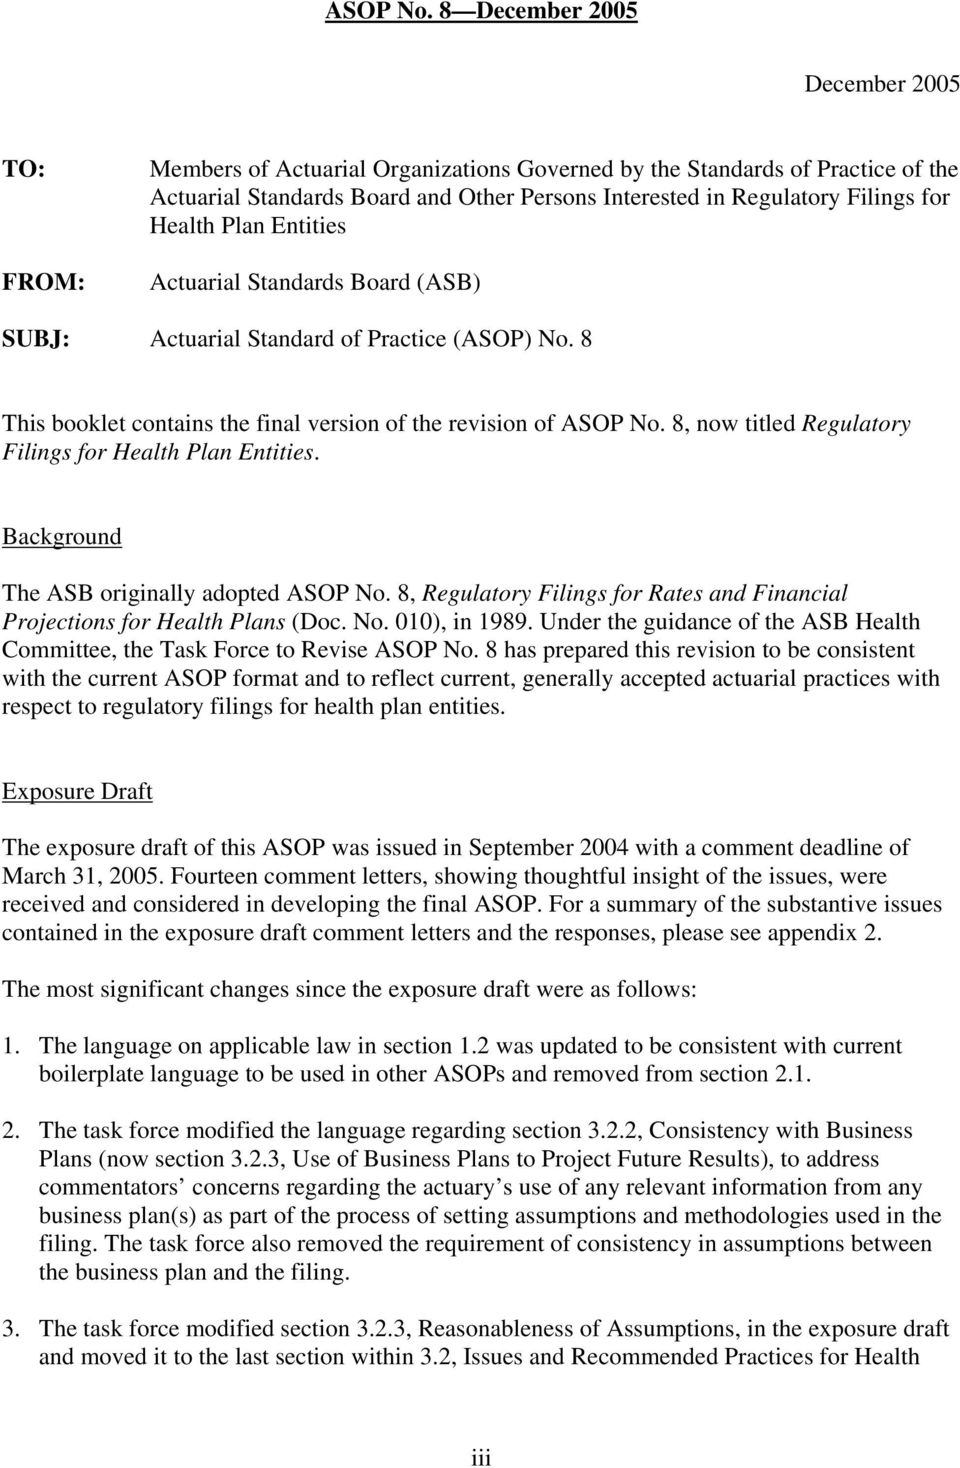 8, now titled Regulatory Filings for Health Plan Entities. Background The ASB originally adopted ASOP No. 8, Regulatory Filings for Rates and Financial Projections for Health Plans (Doc. No. 010), in 1989.